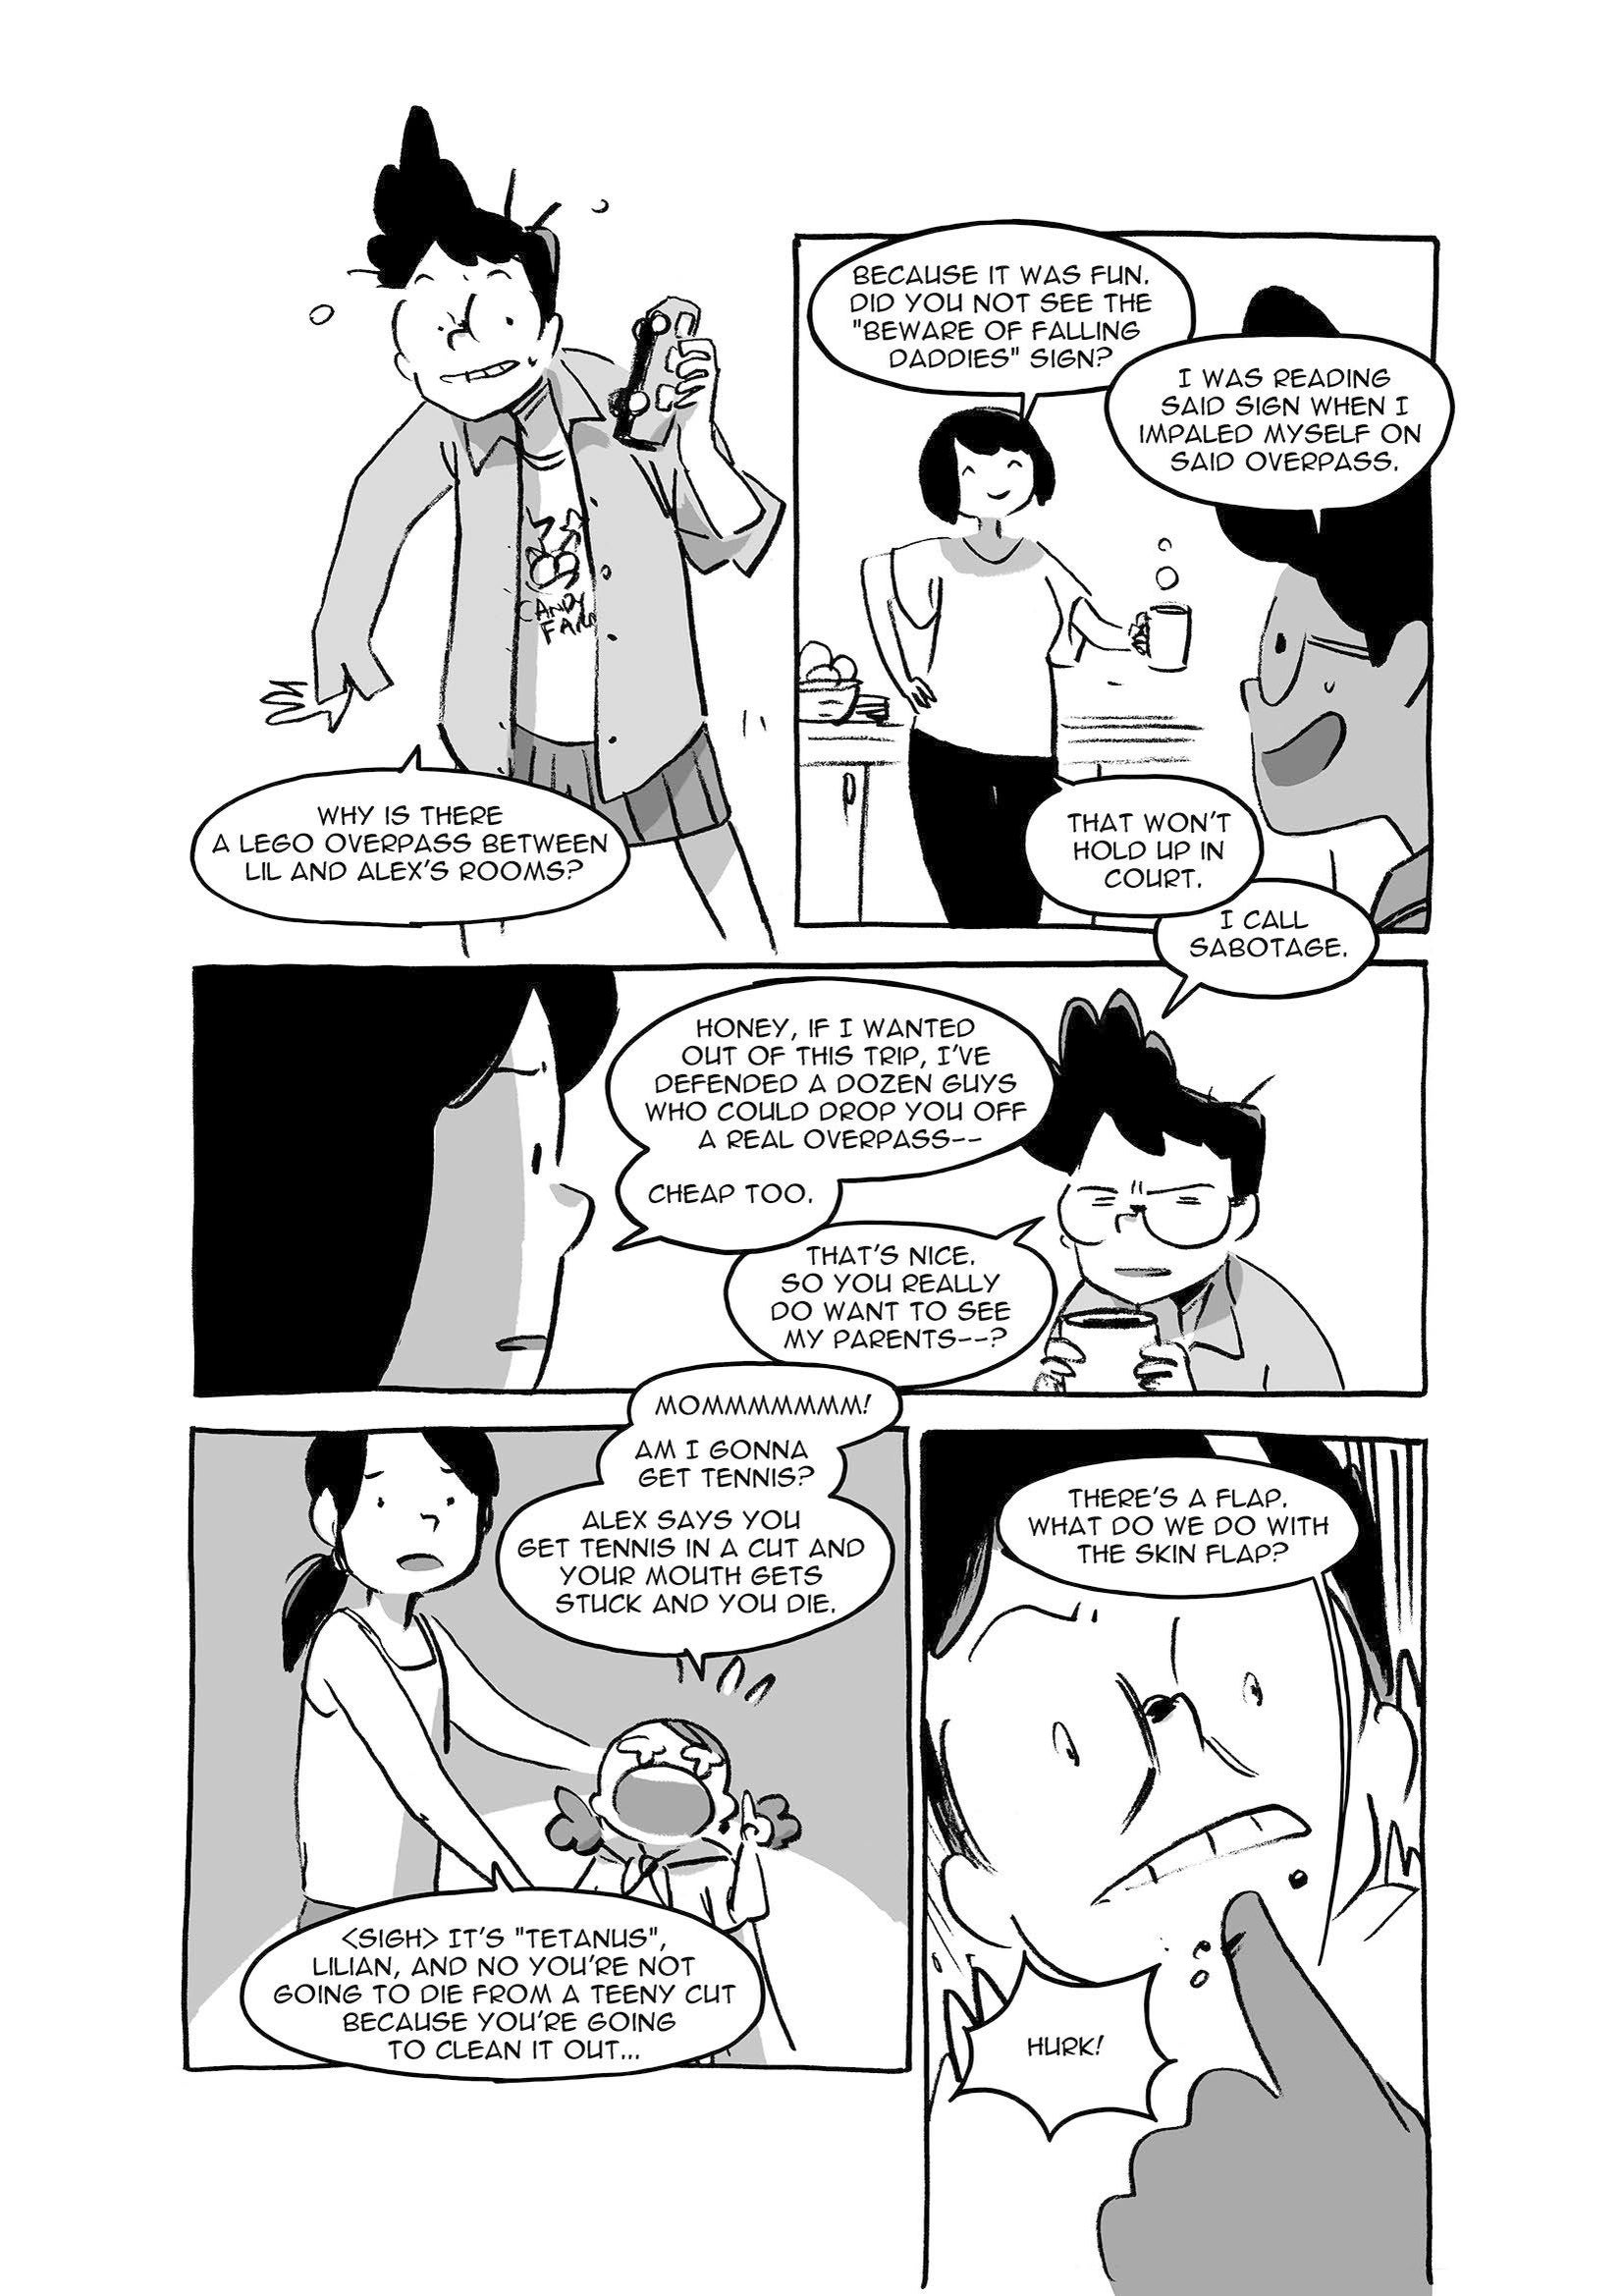 immortal-issue-2-page1-page-2.jpg